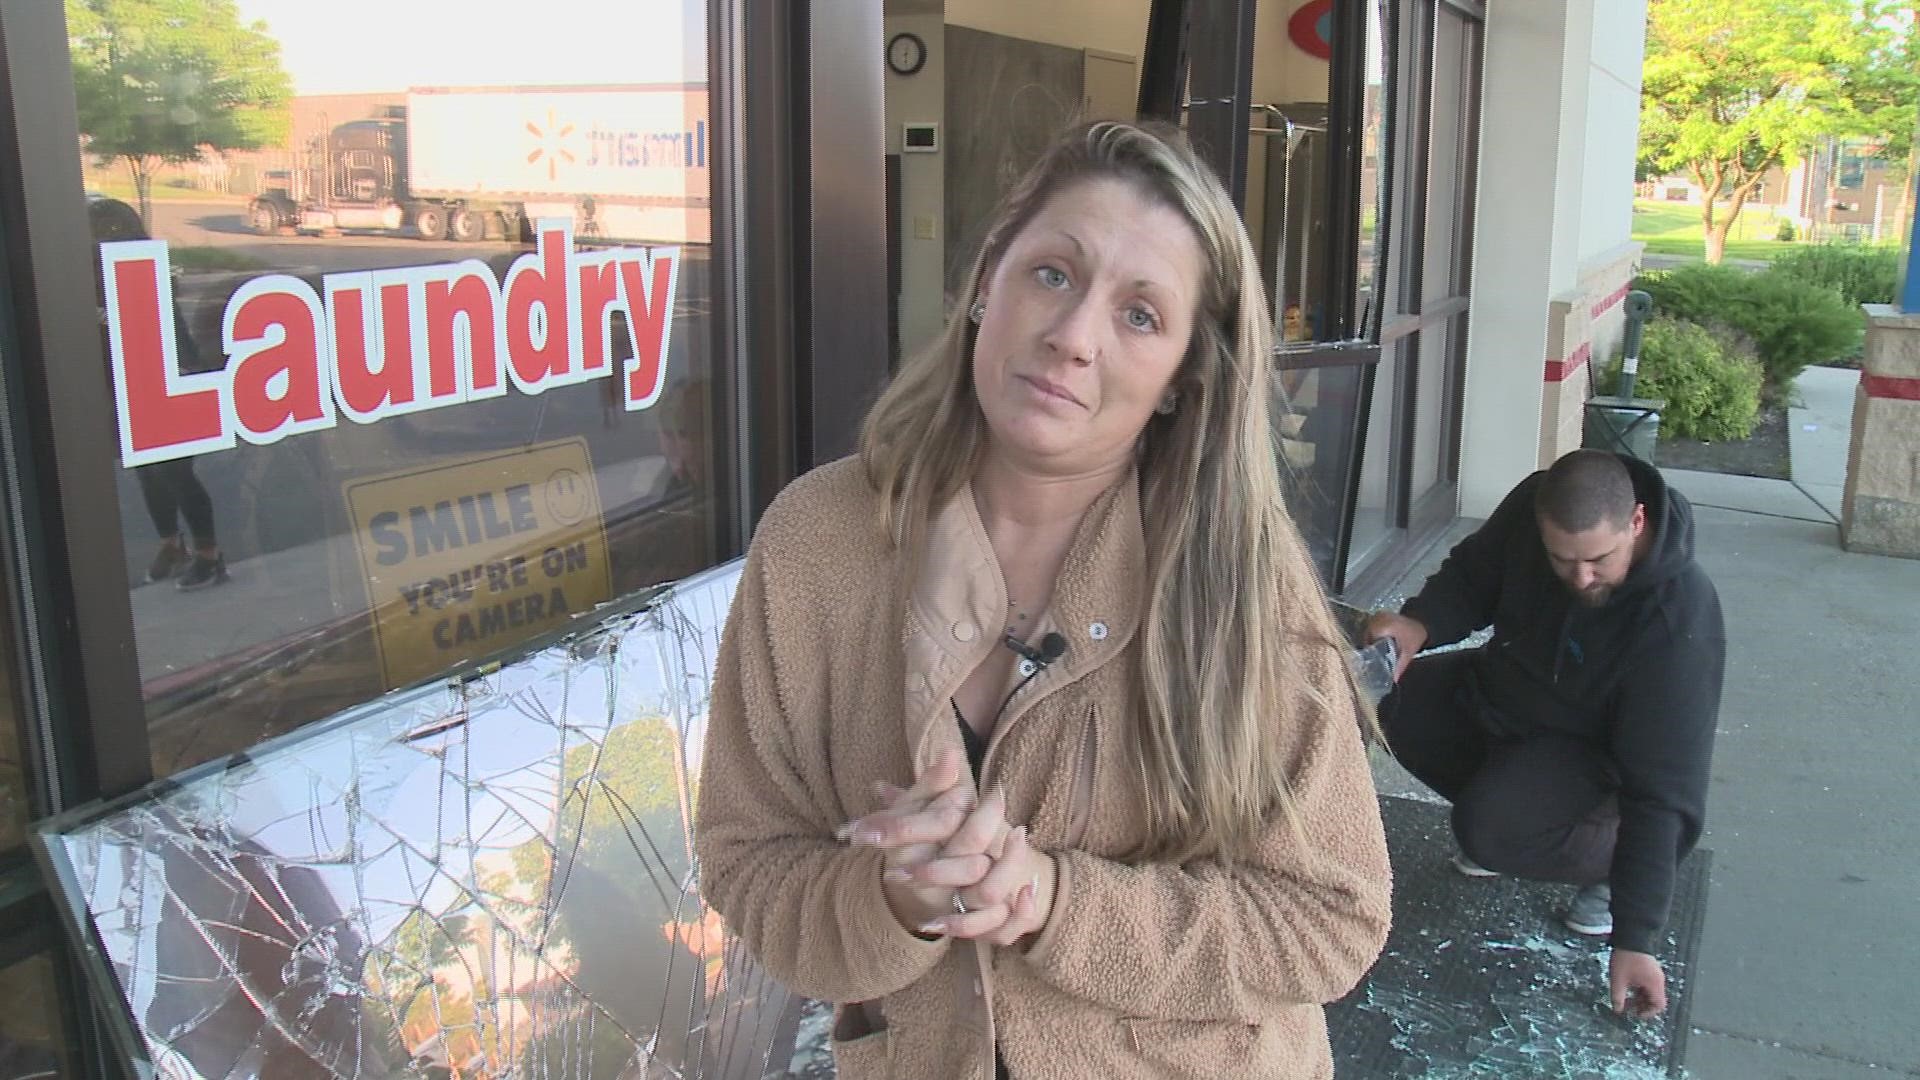 A Jeep caused thousands of dollars in damages after it crashed through the doors at Laundry Land in Spokane. The manager said the thief took only a comment box.